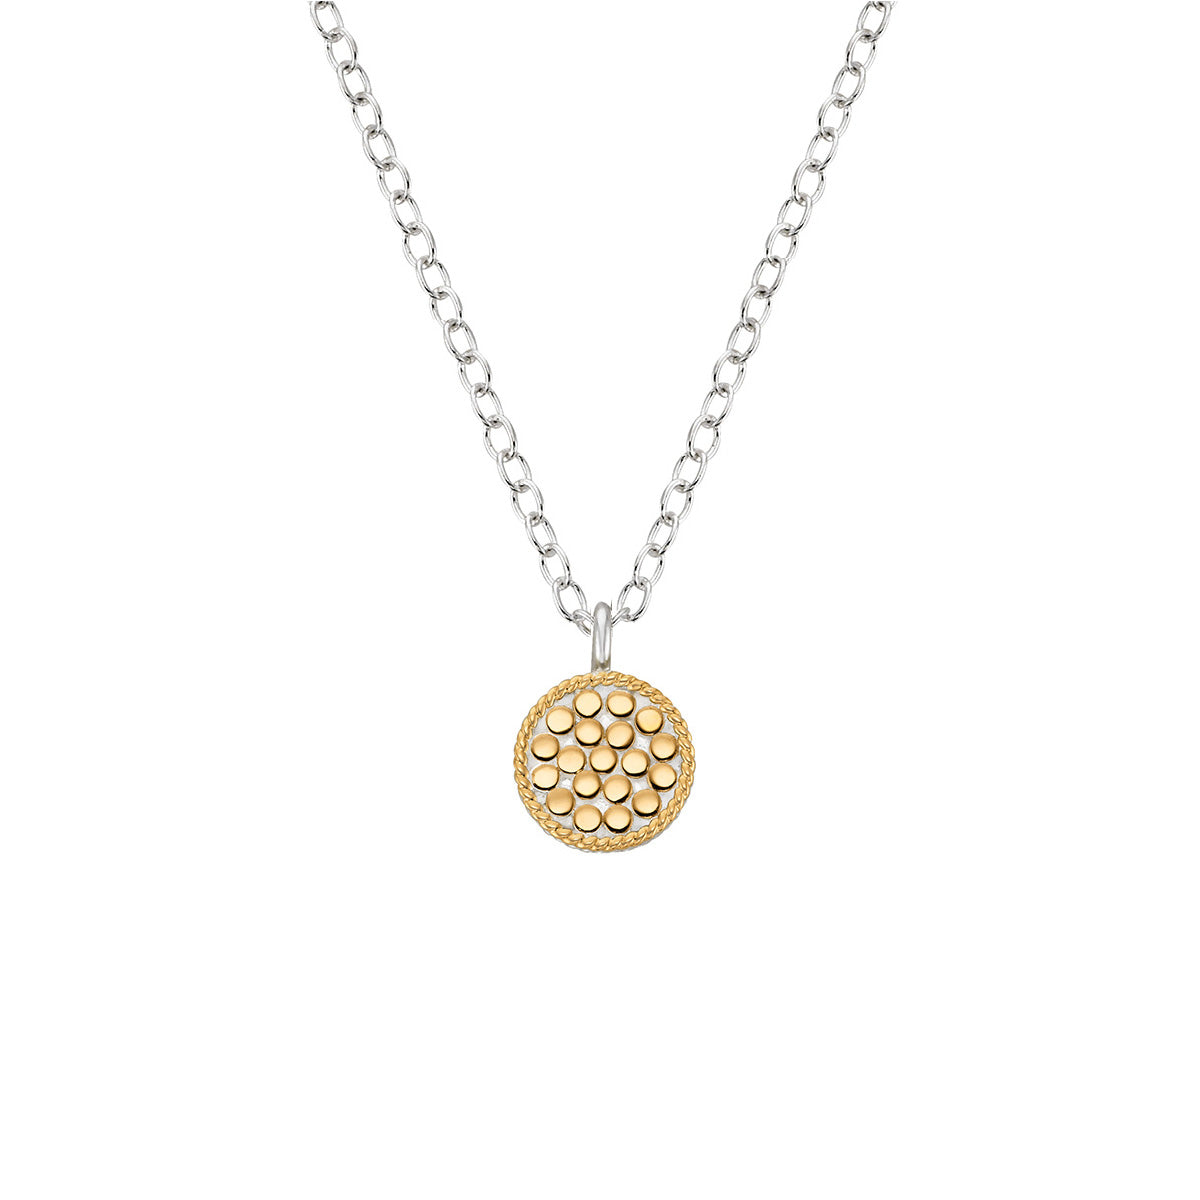 Ana Beck 18k gold plated and sterling silver Mini Reversible Circle Necklace